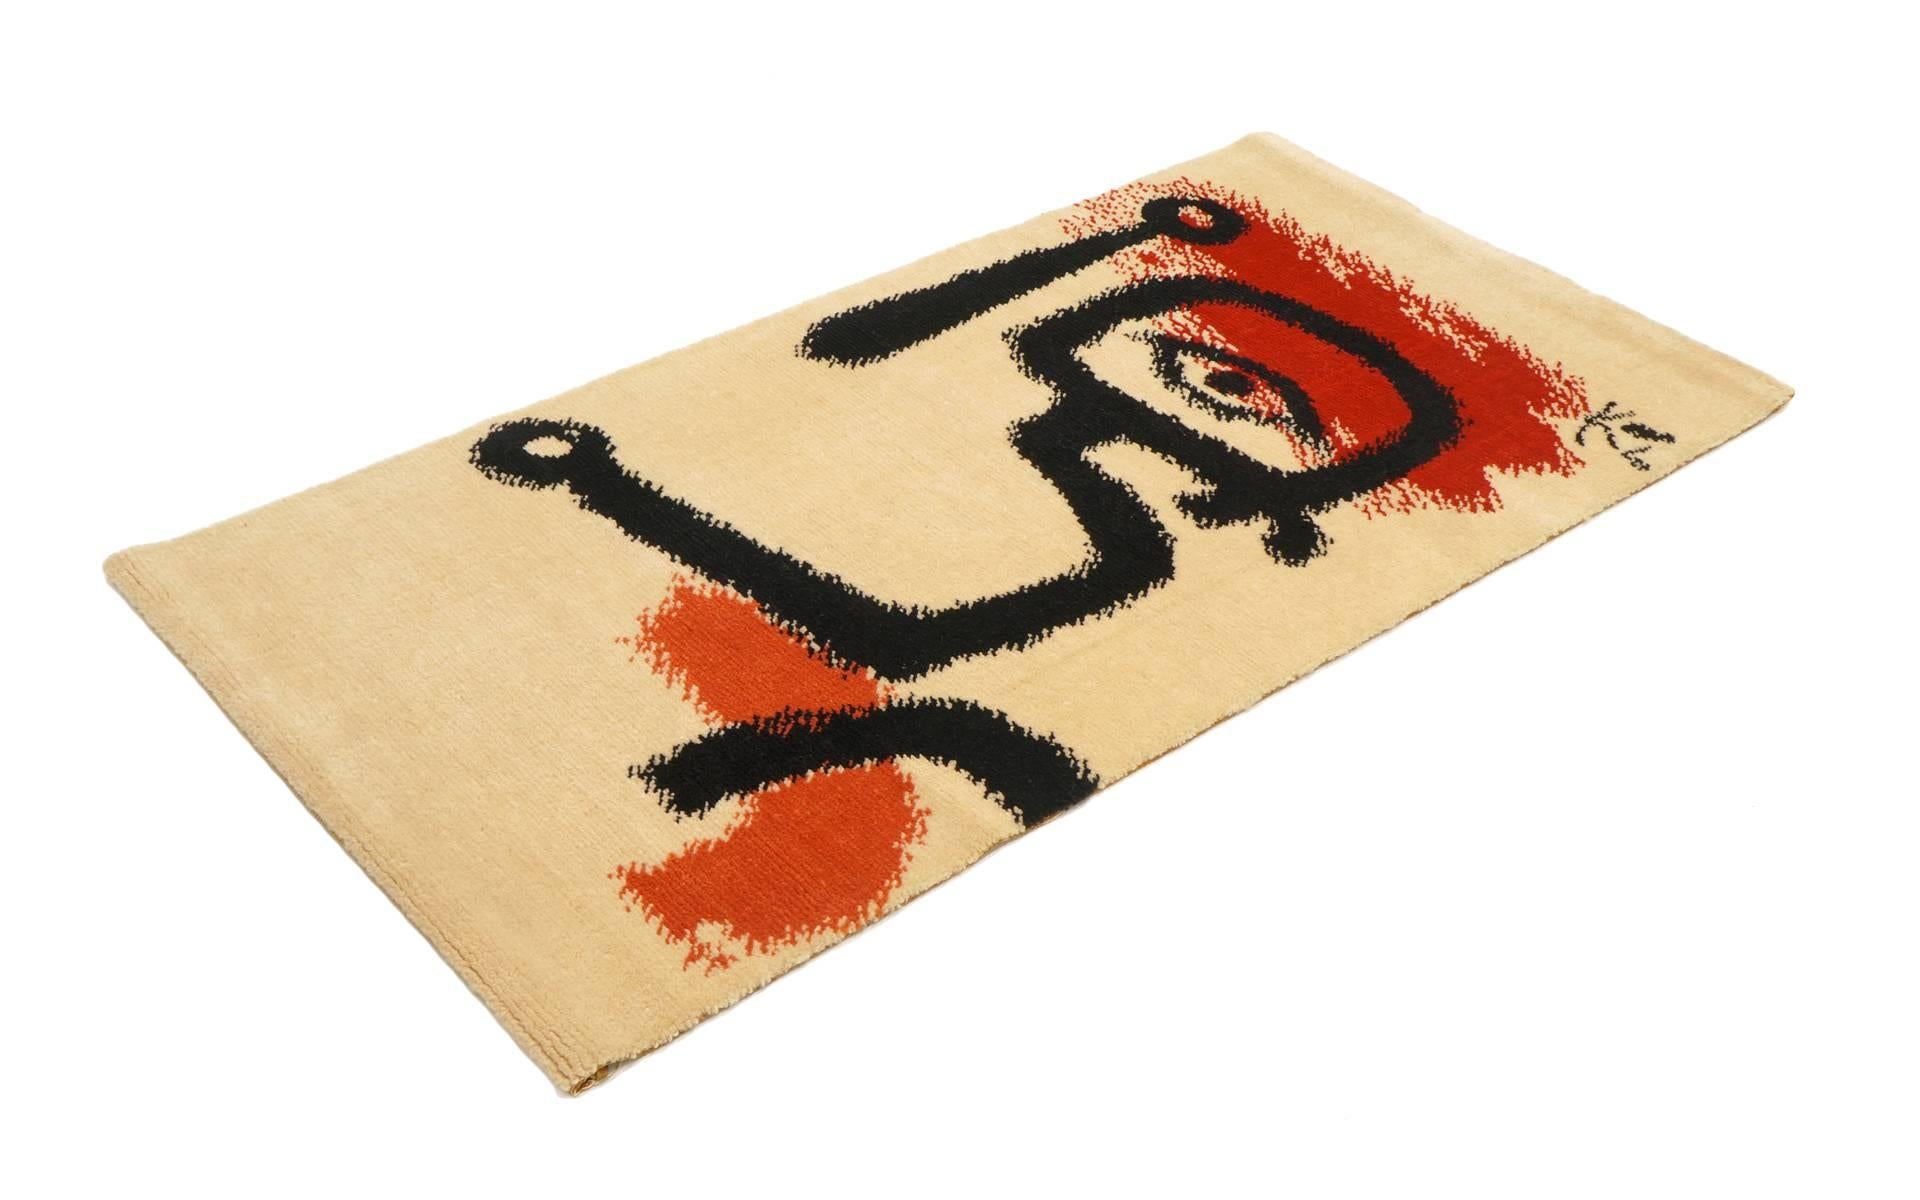 Wall hanging / rug after Paul Klee's 1940 oil painting 